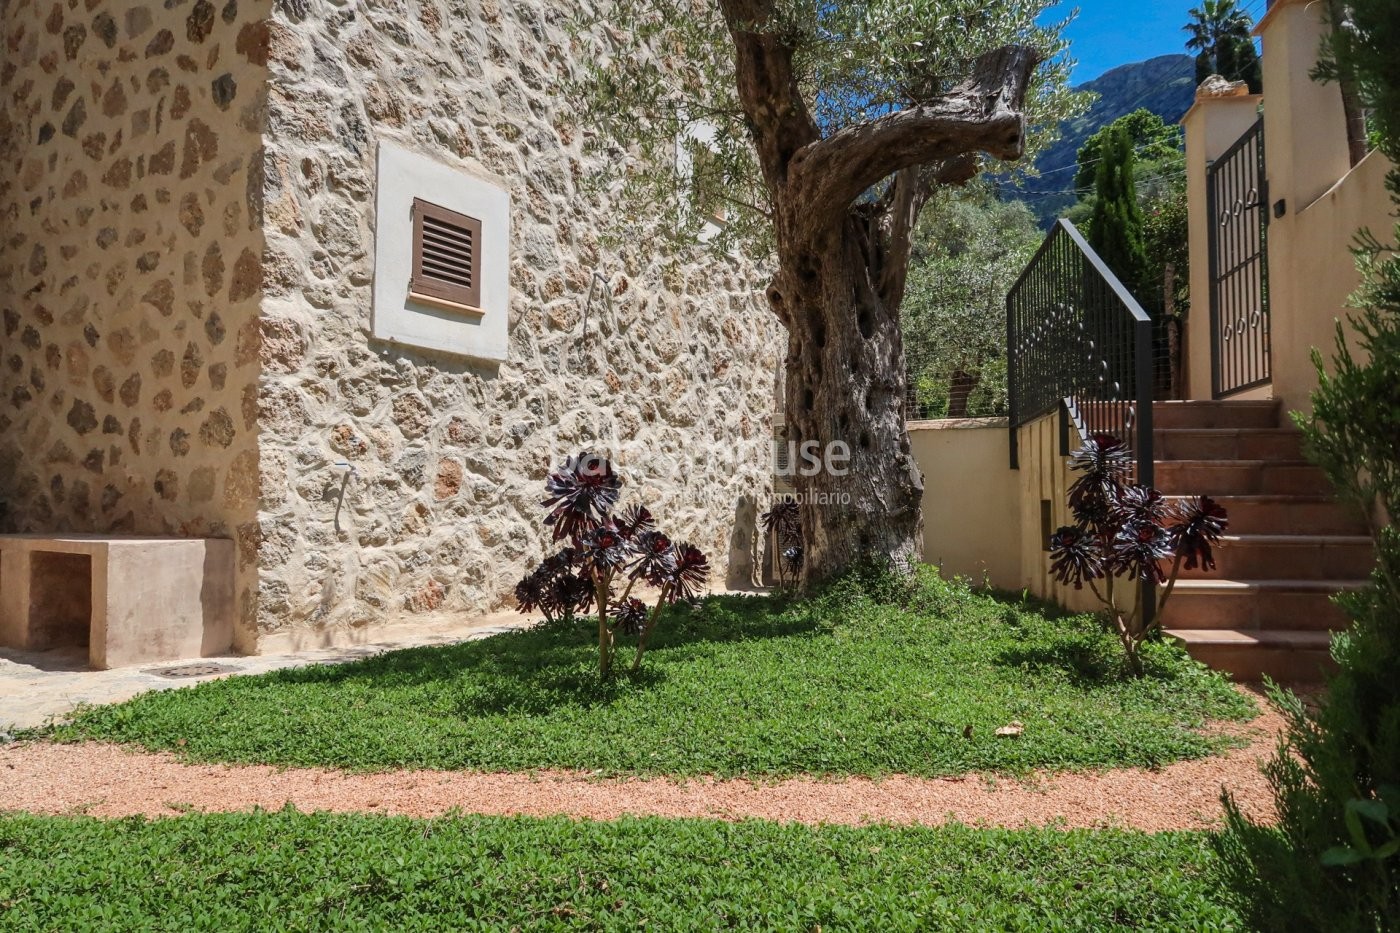 Rustic delicacy and the taste of authenticity in these new houses in the beautiful village of Deiá.